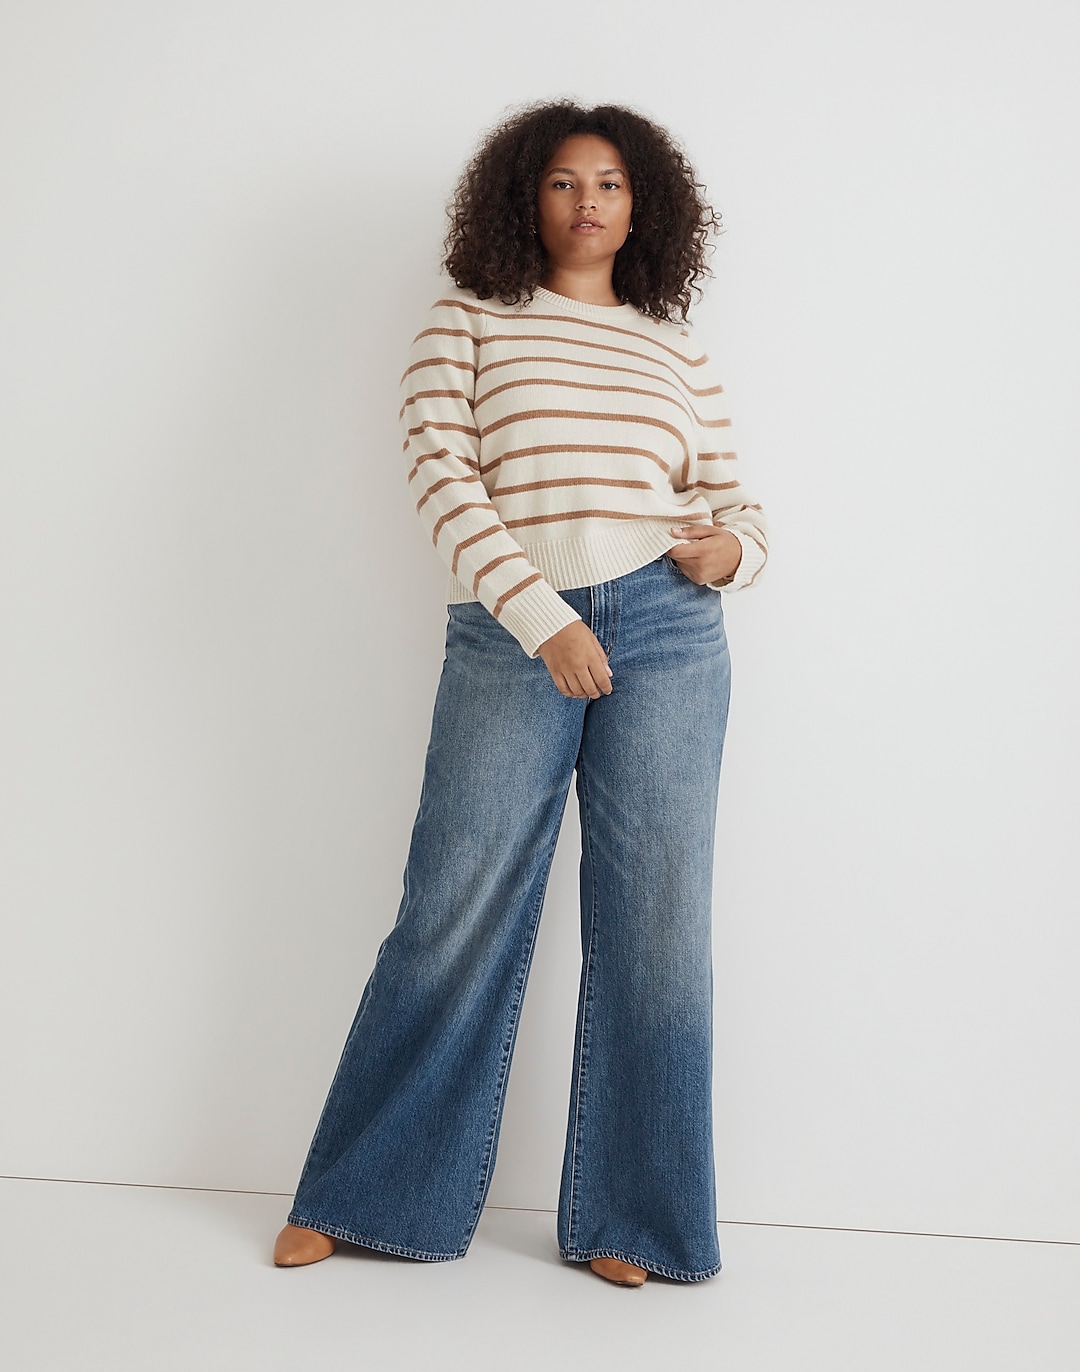 (Re)sourced Cashmere Crewneck Sweater in Stripe | Madewell